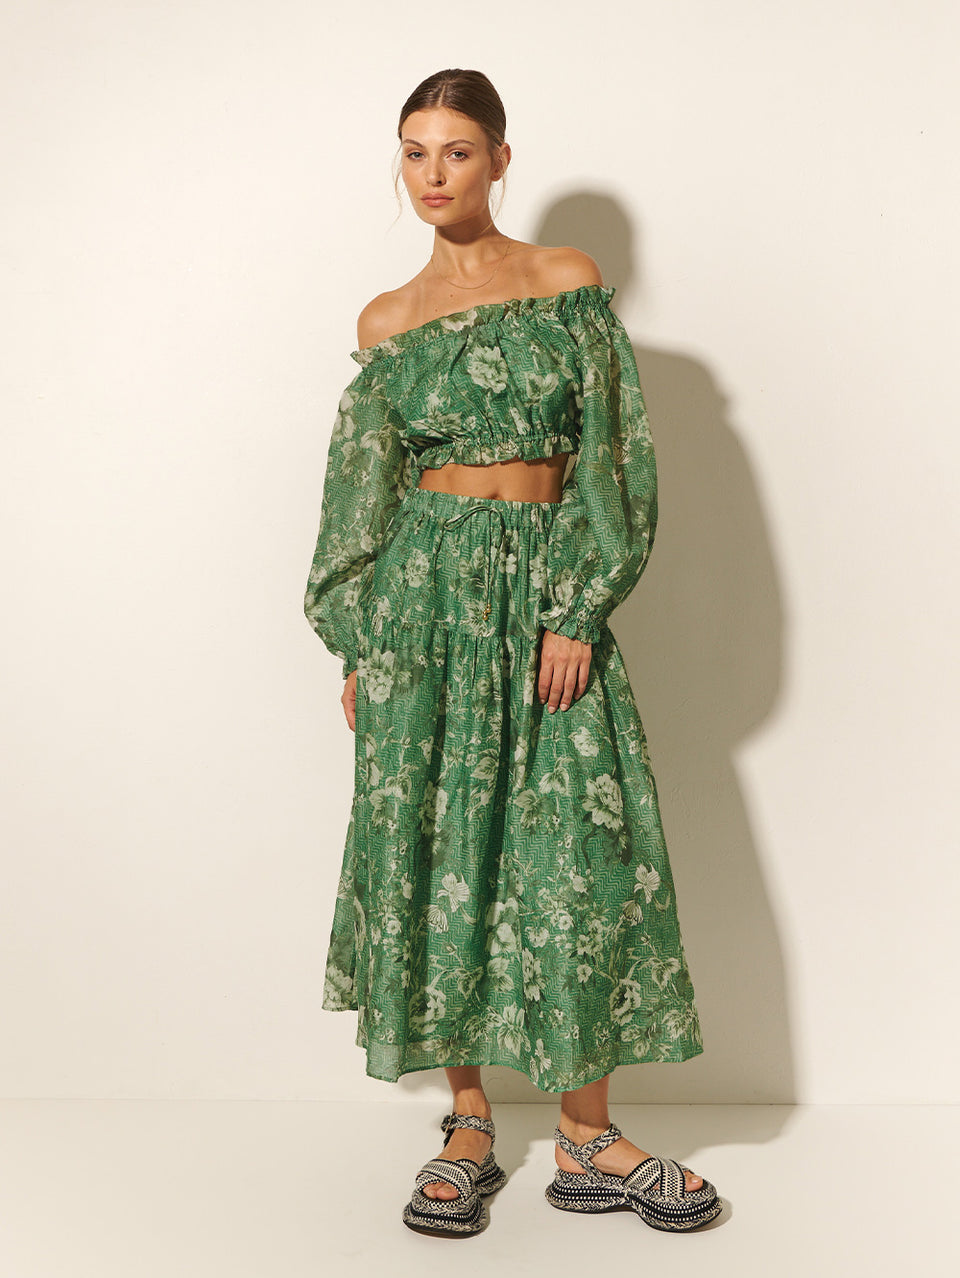 Studio model wears KIVARI Khalo Crop Top: A green floral off-the-shoulder top with full-length blouson sleeves and elasticated bust, waist and sleeve details.